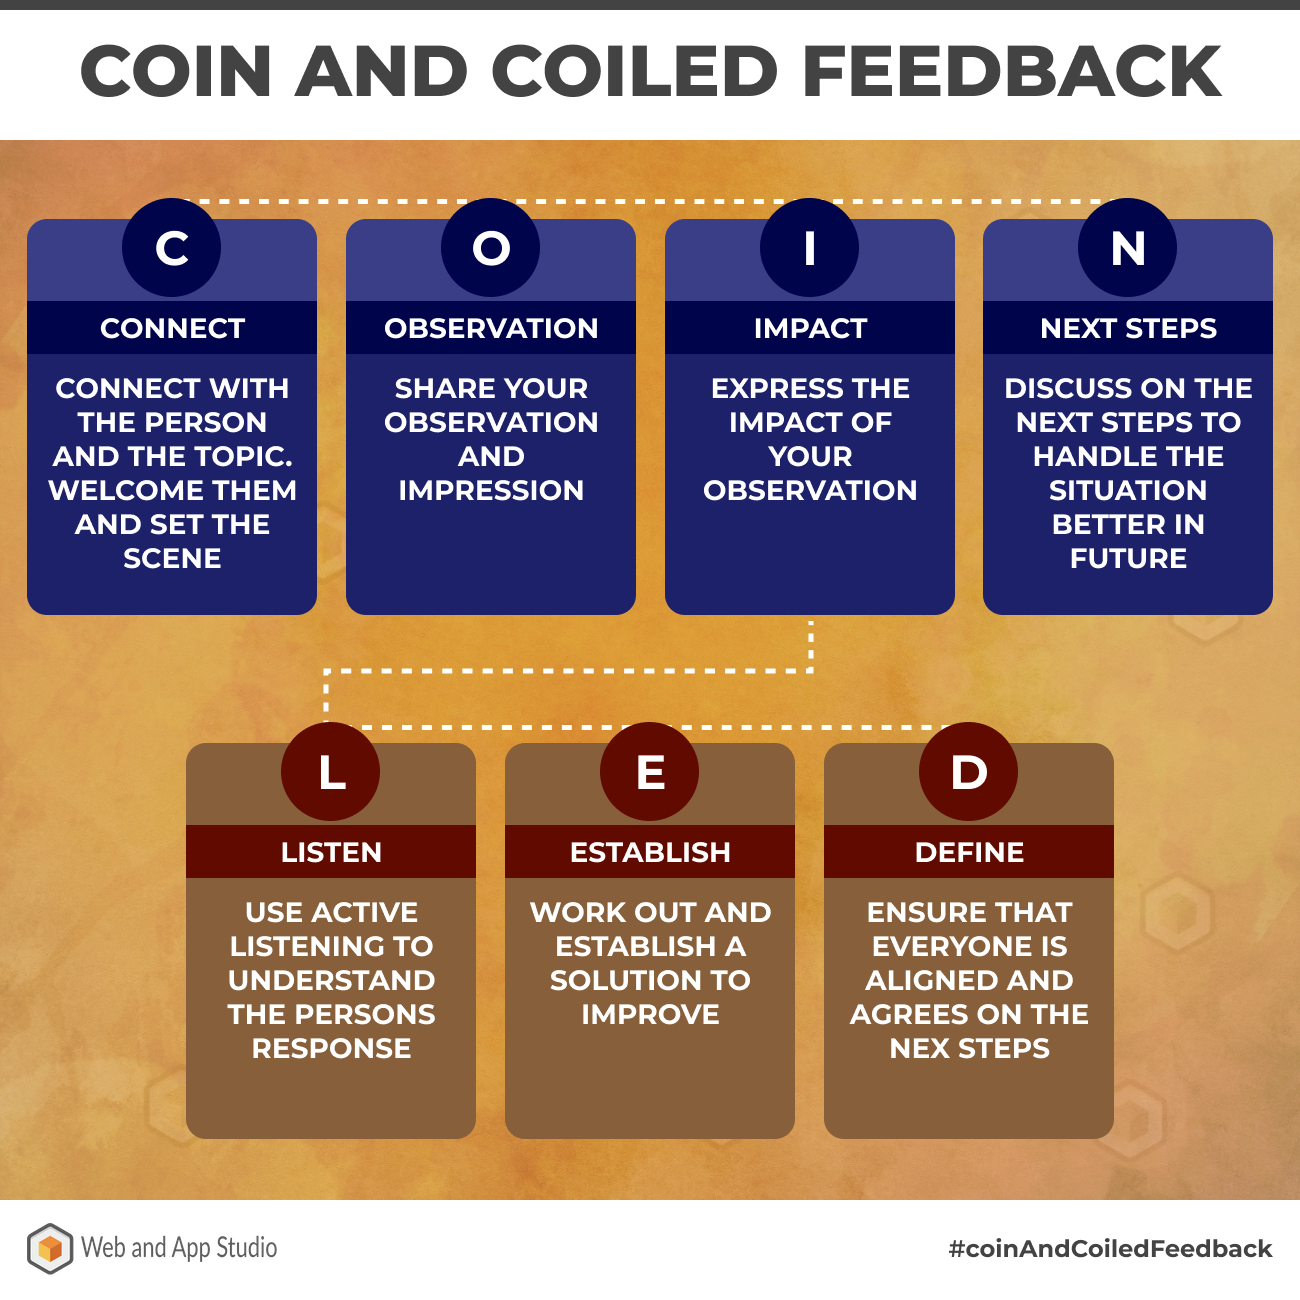 Coin and Coiled Feedback